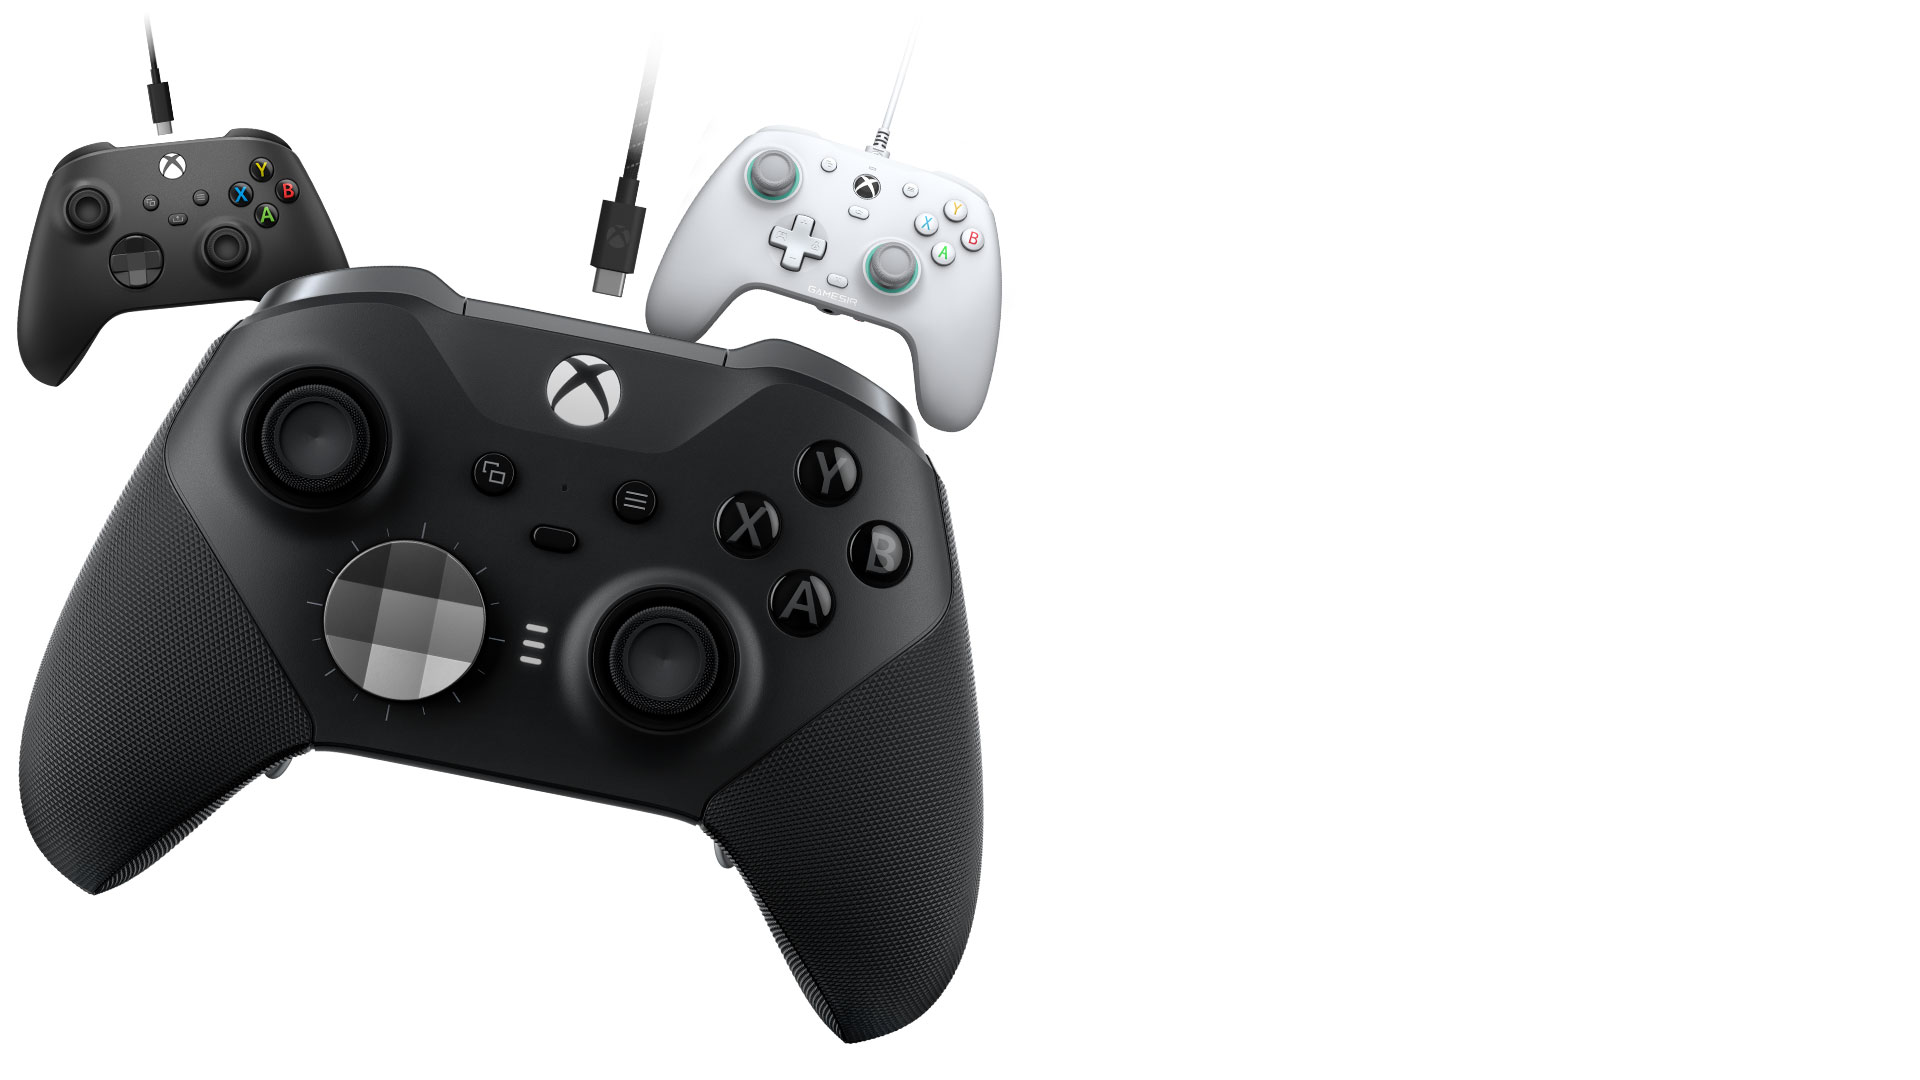 Wired Xbox Elite wireless controller, wired xbox wireless controller, and a wired D4X controller